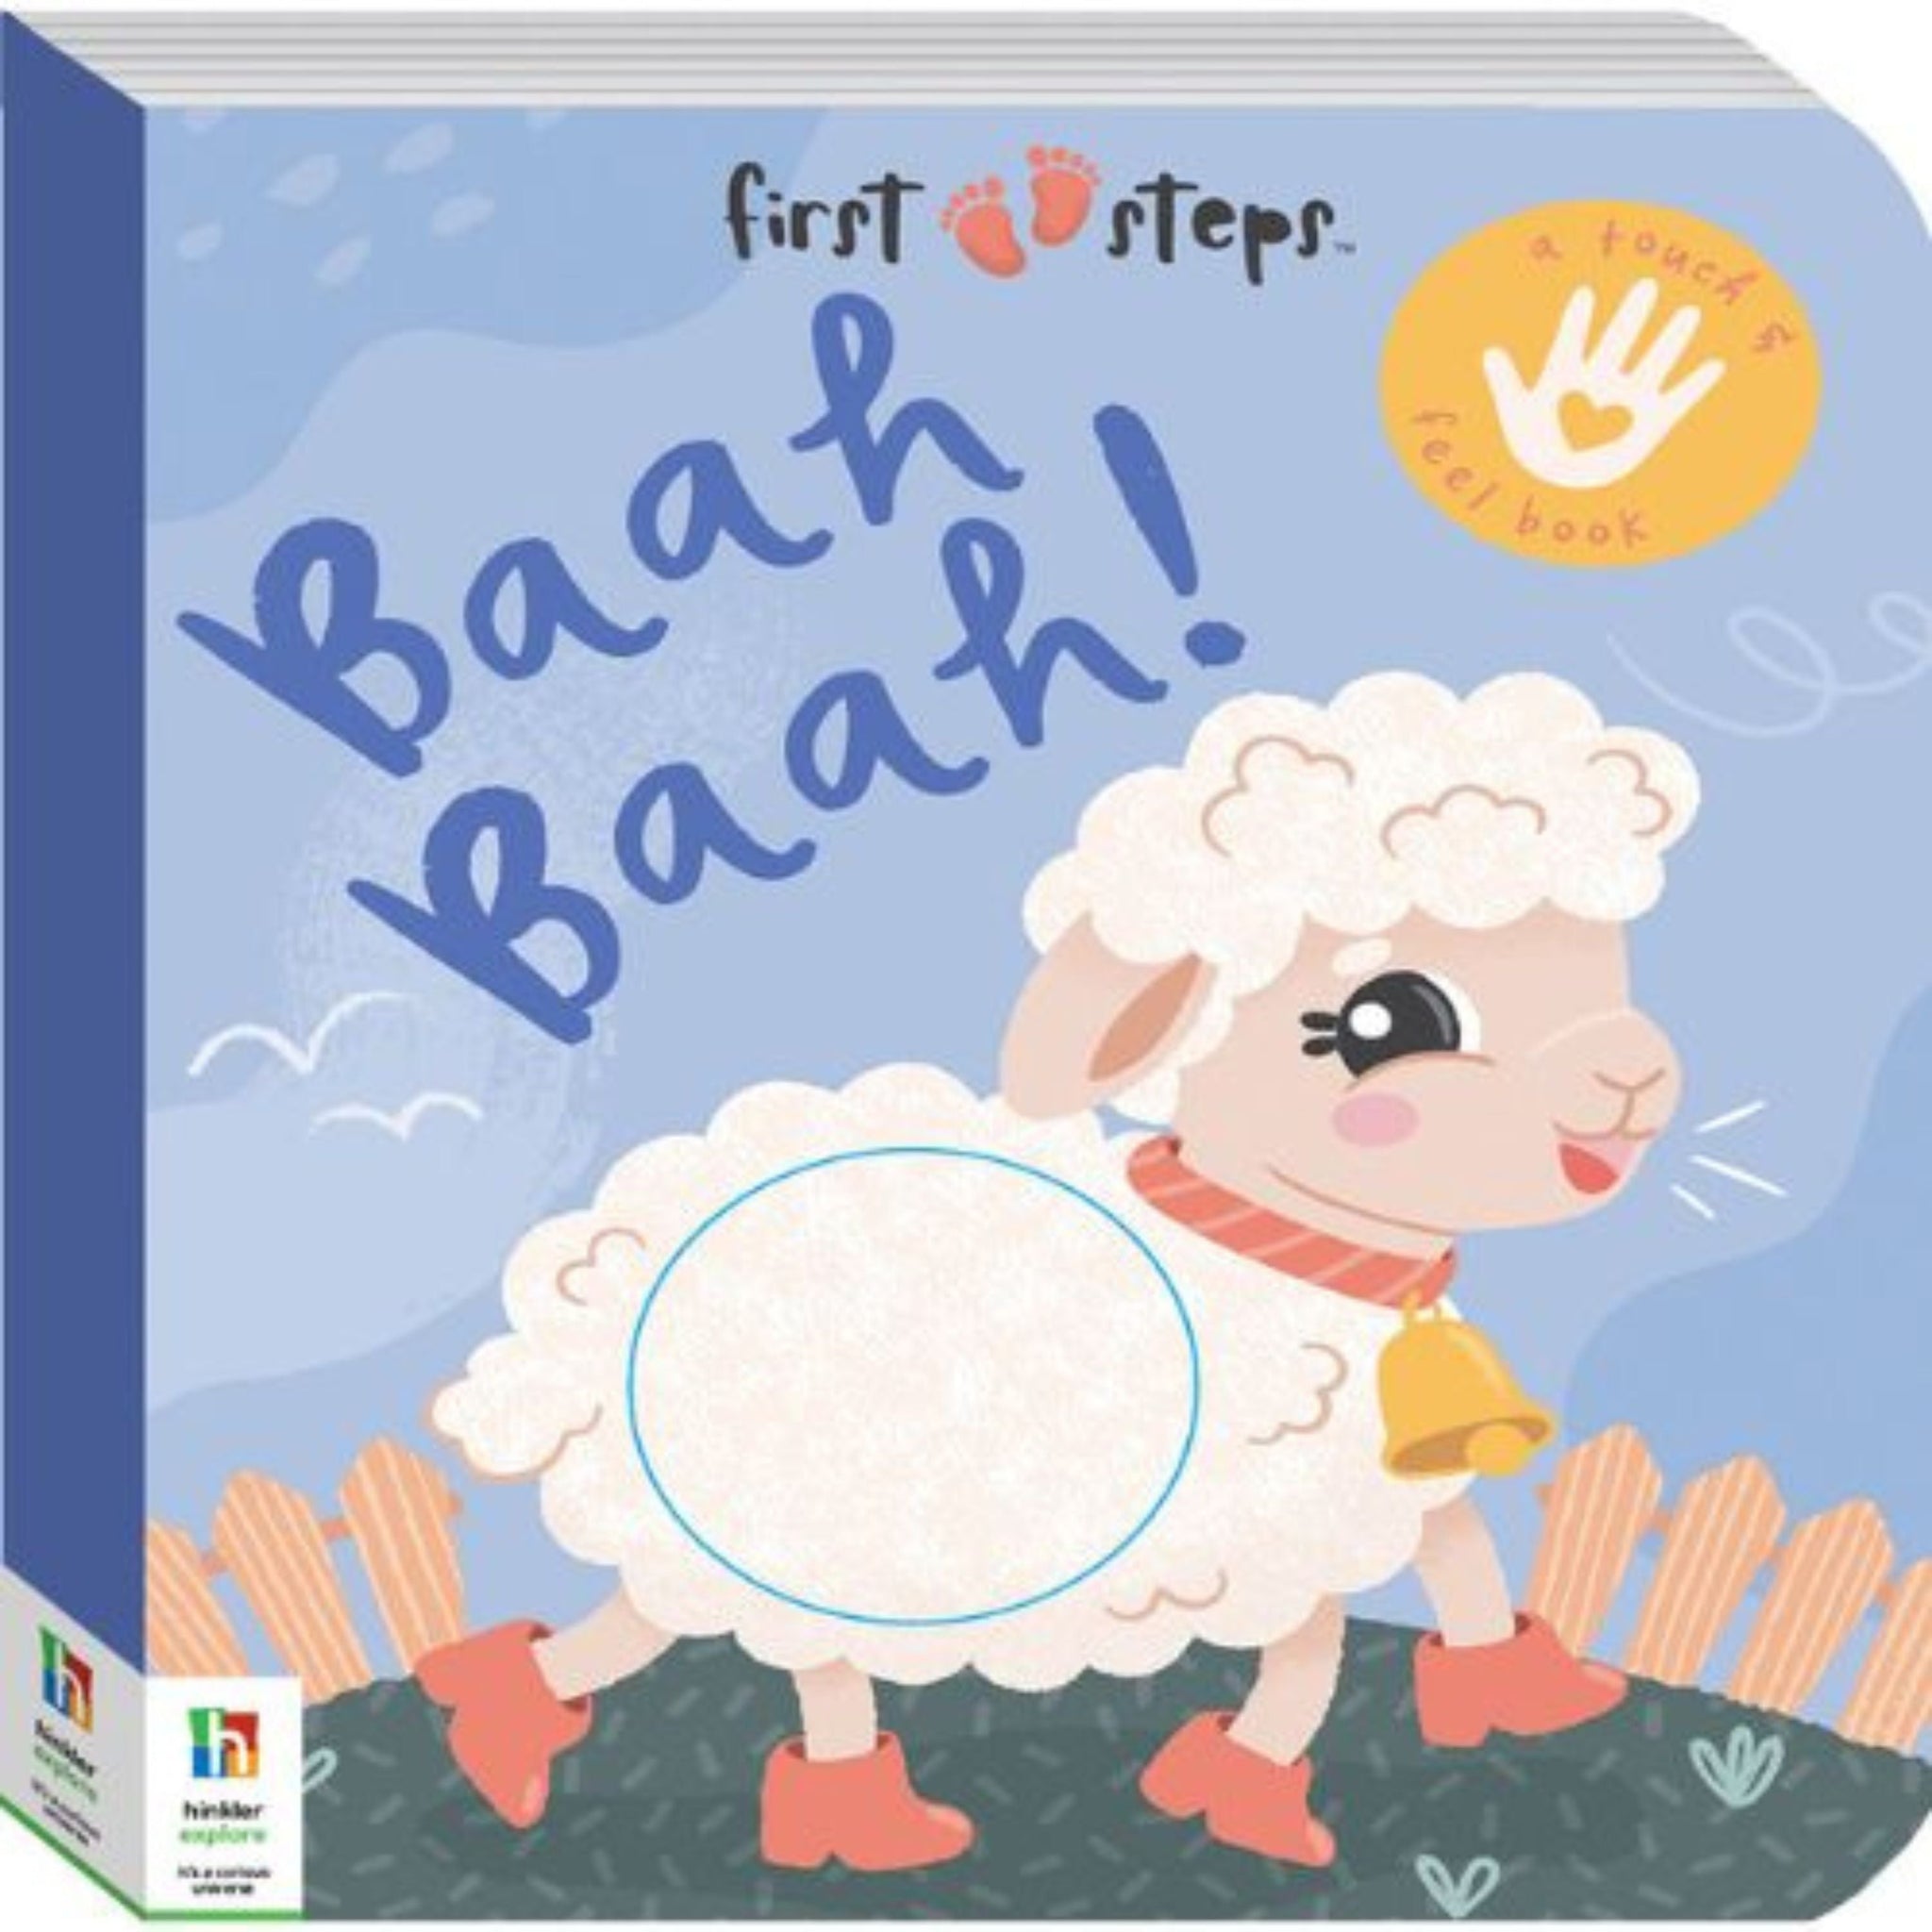 First Steps Baa Baa! Touch and Feel Board Book